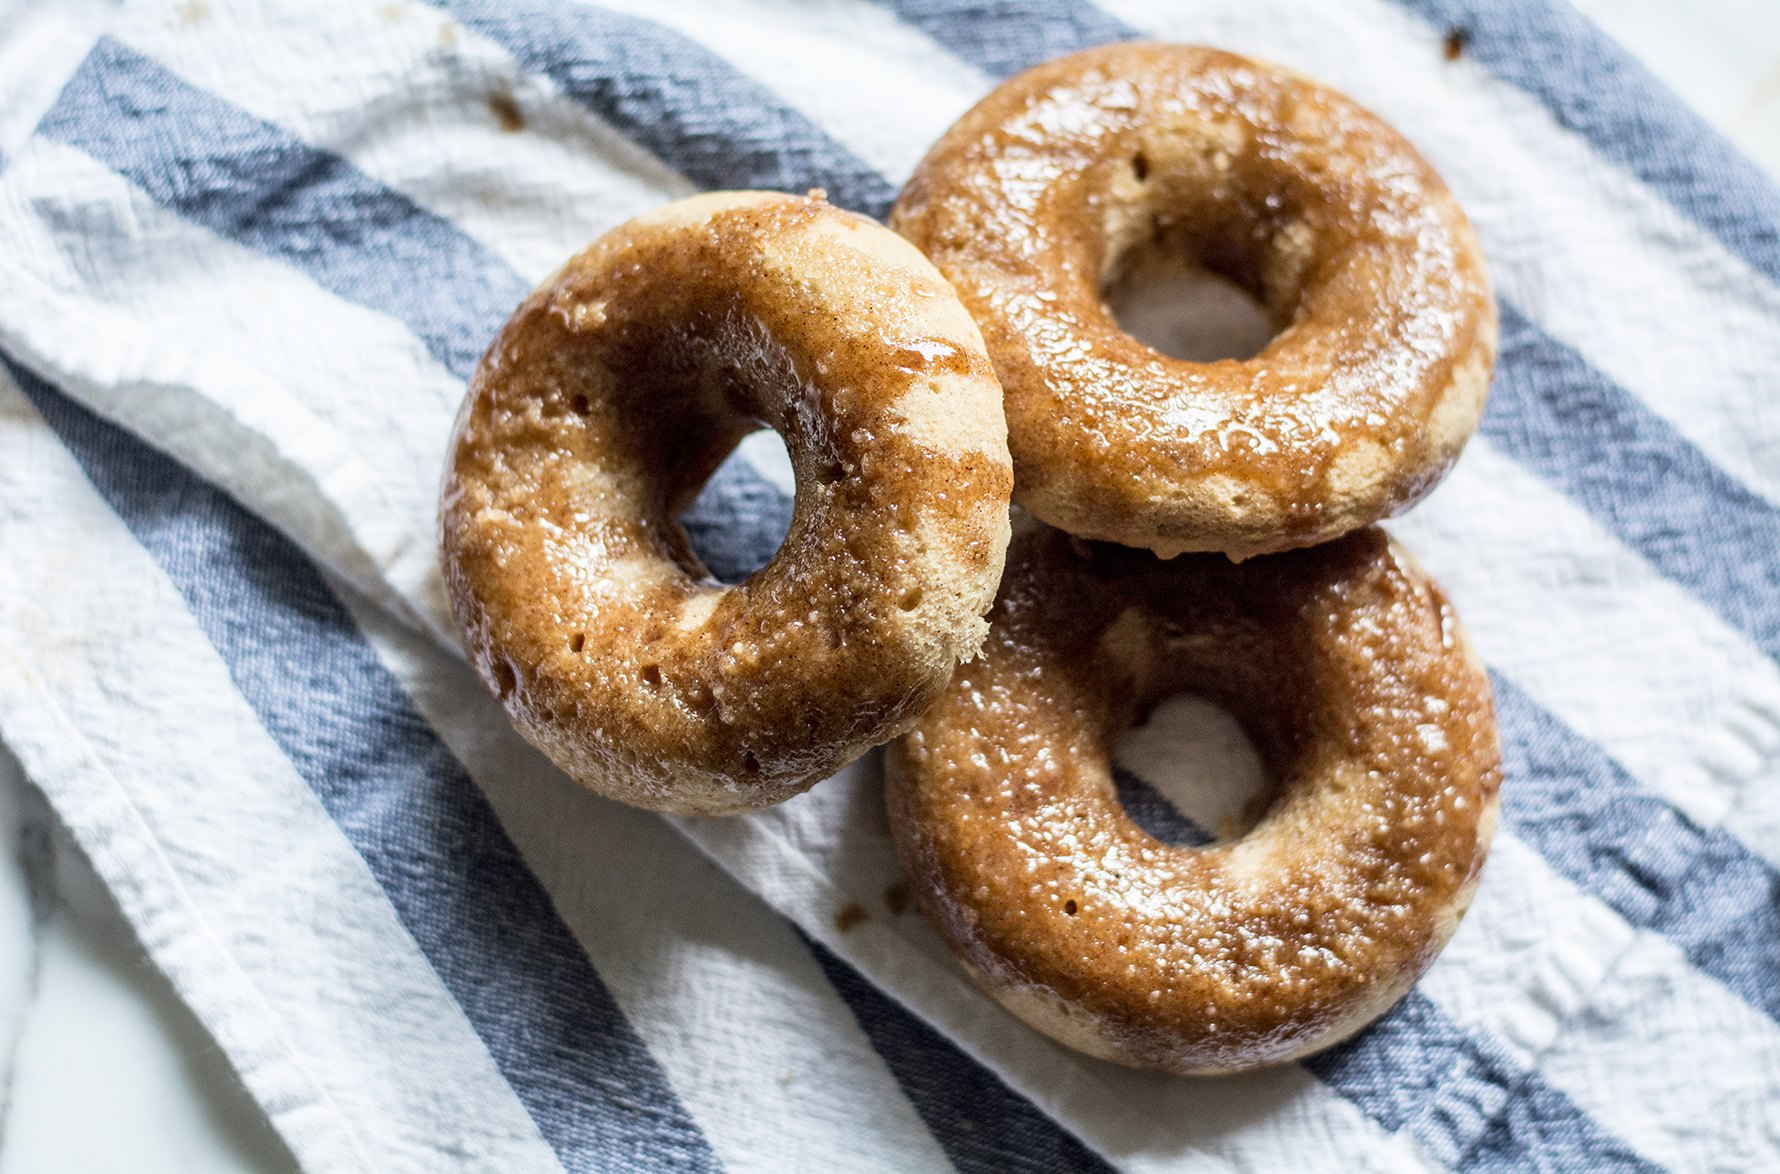 Gluten-Free Maple Baked Donuts with Maple Glaze | Lemons and Basil